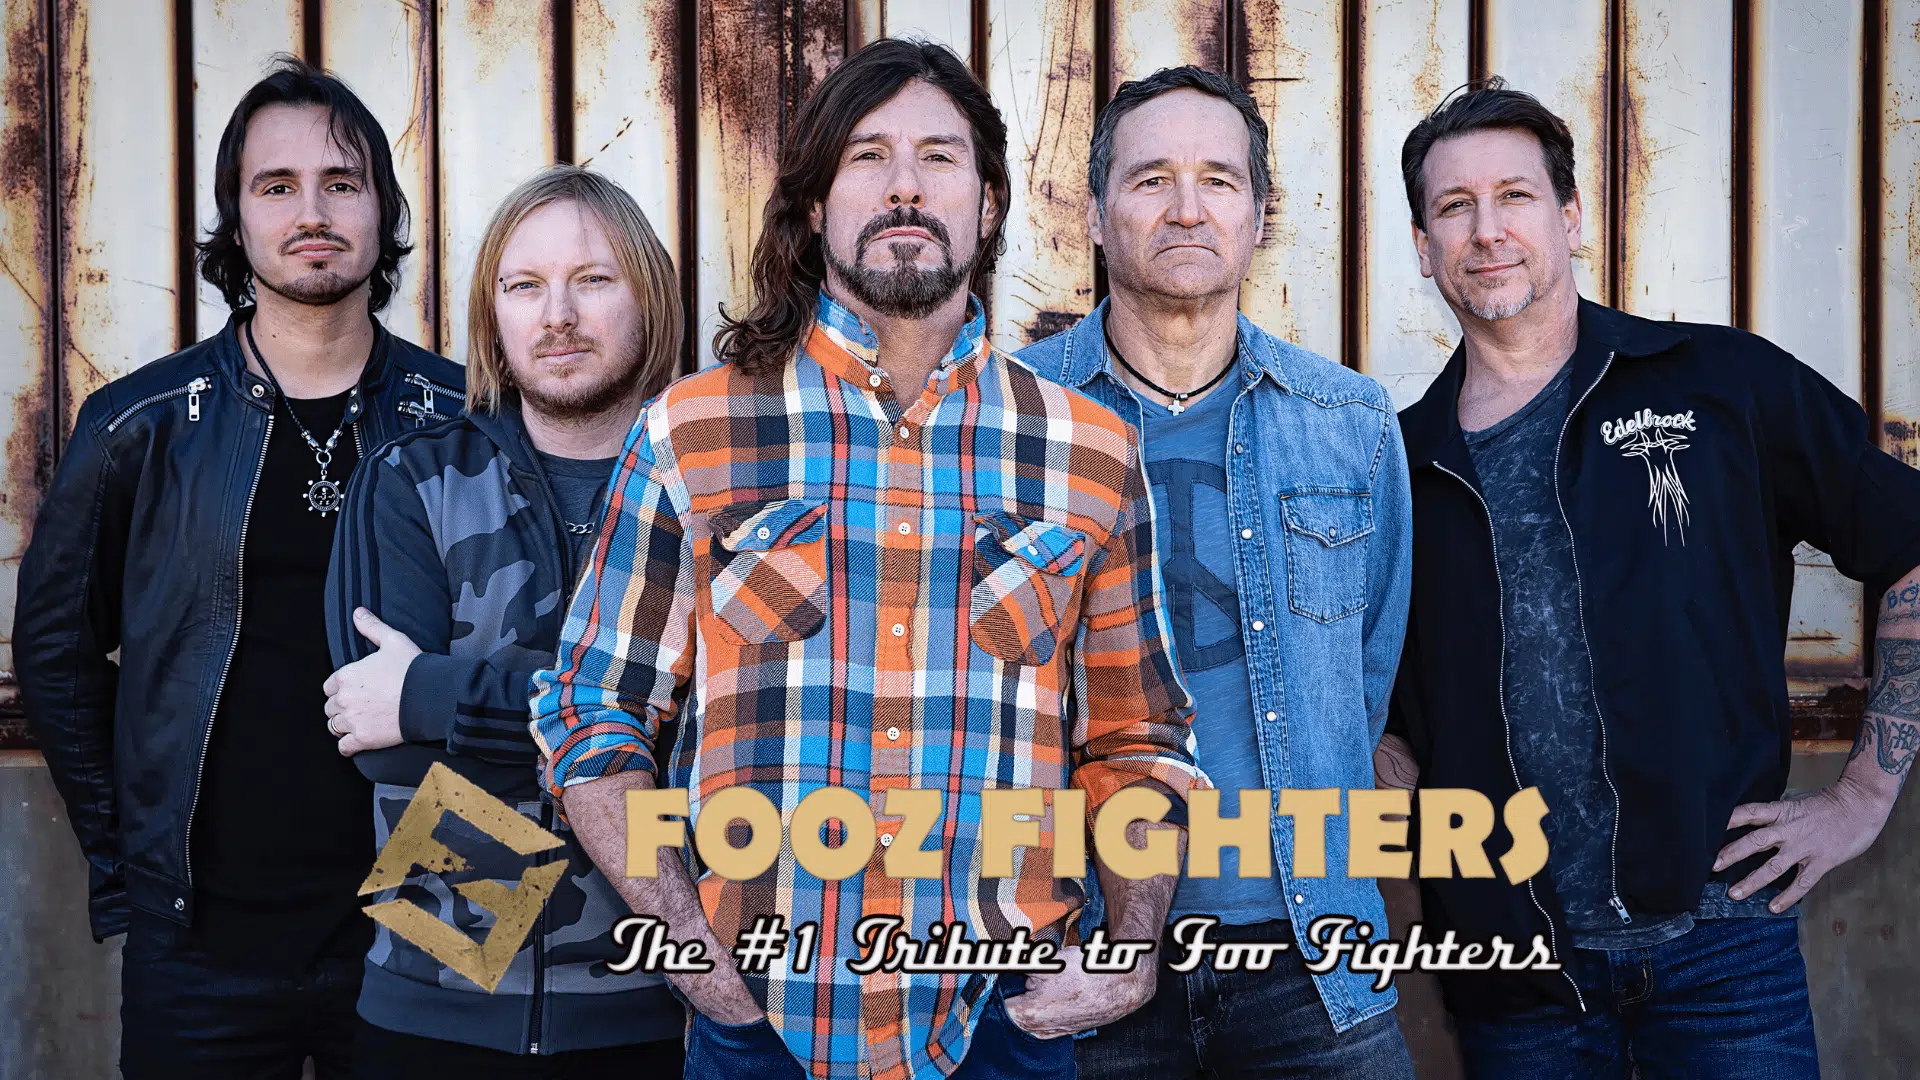 The Fooz Fighters